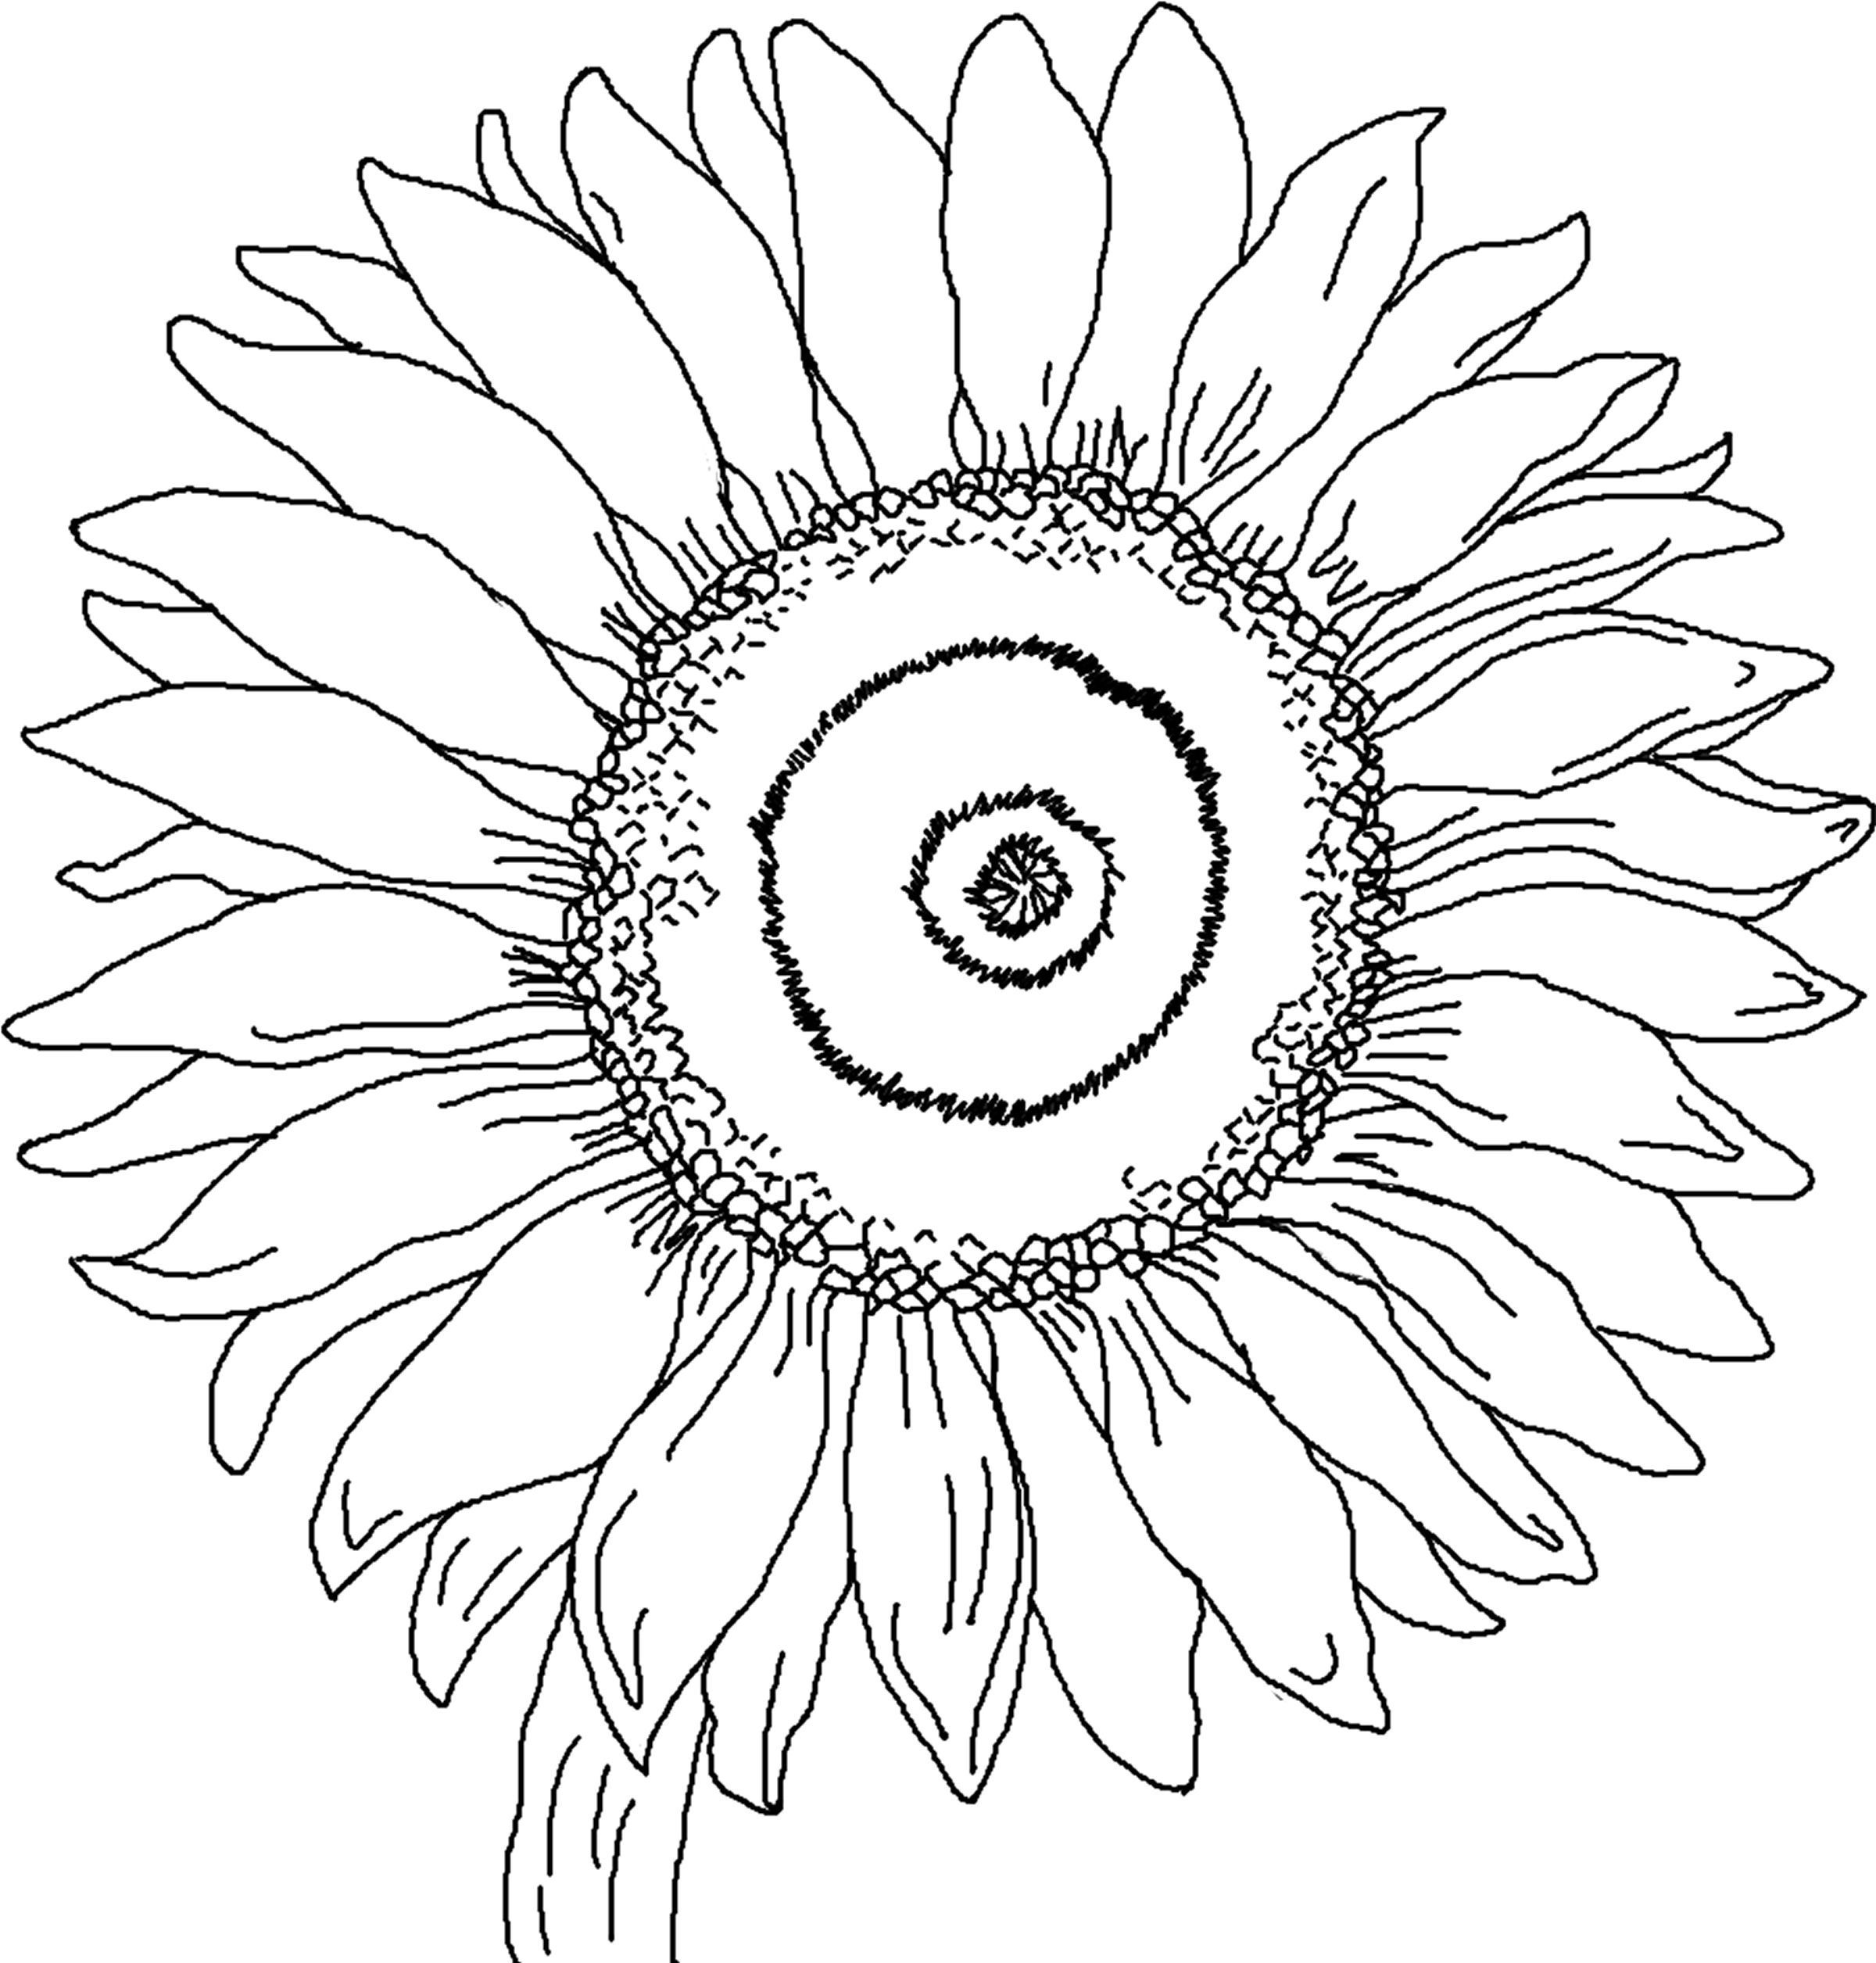 Free printable sunflower coloring pages for kids sunflower coloring pages printable flower coloring pages van gogh coloring